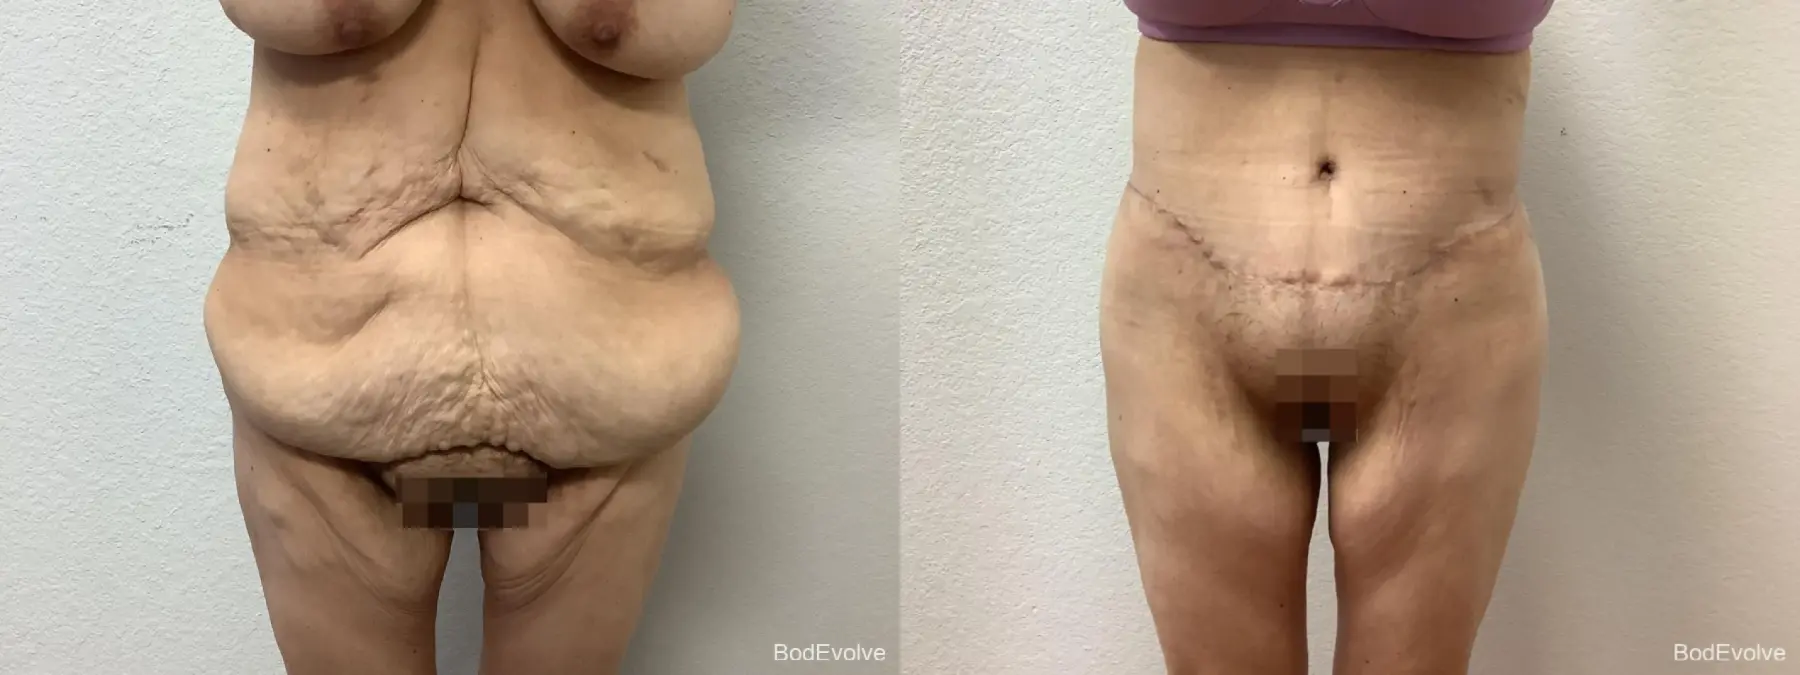 After Massive Weight Loss: Patient 4 - Before and After  